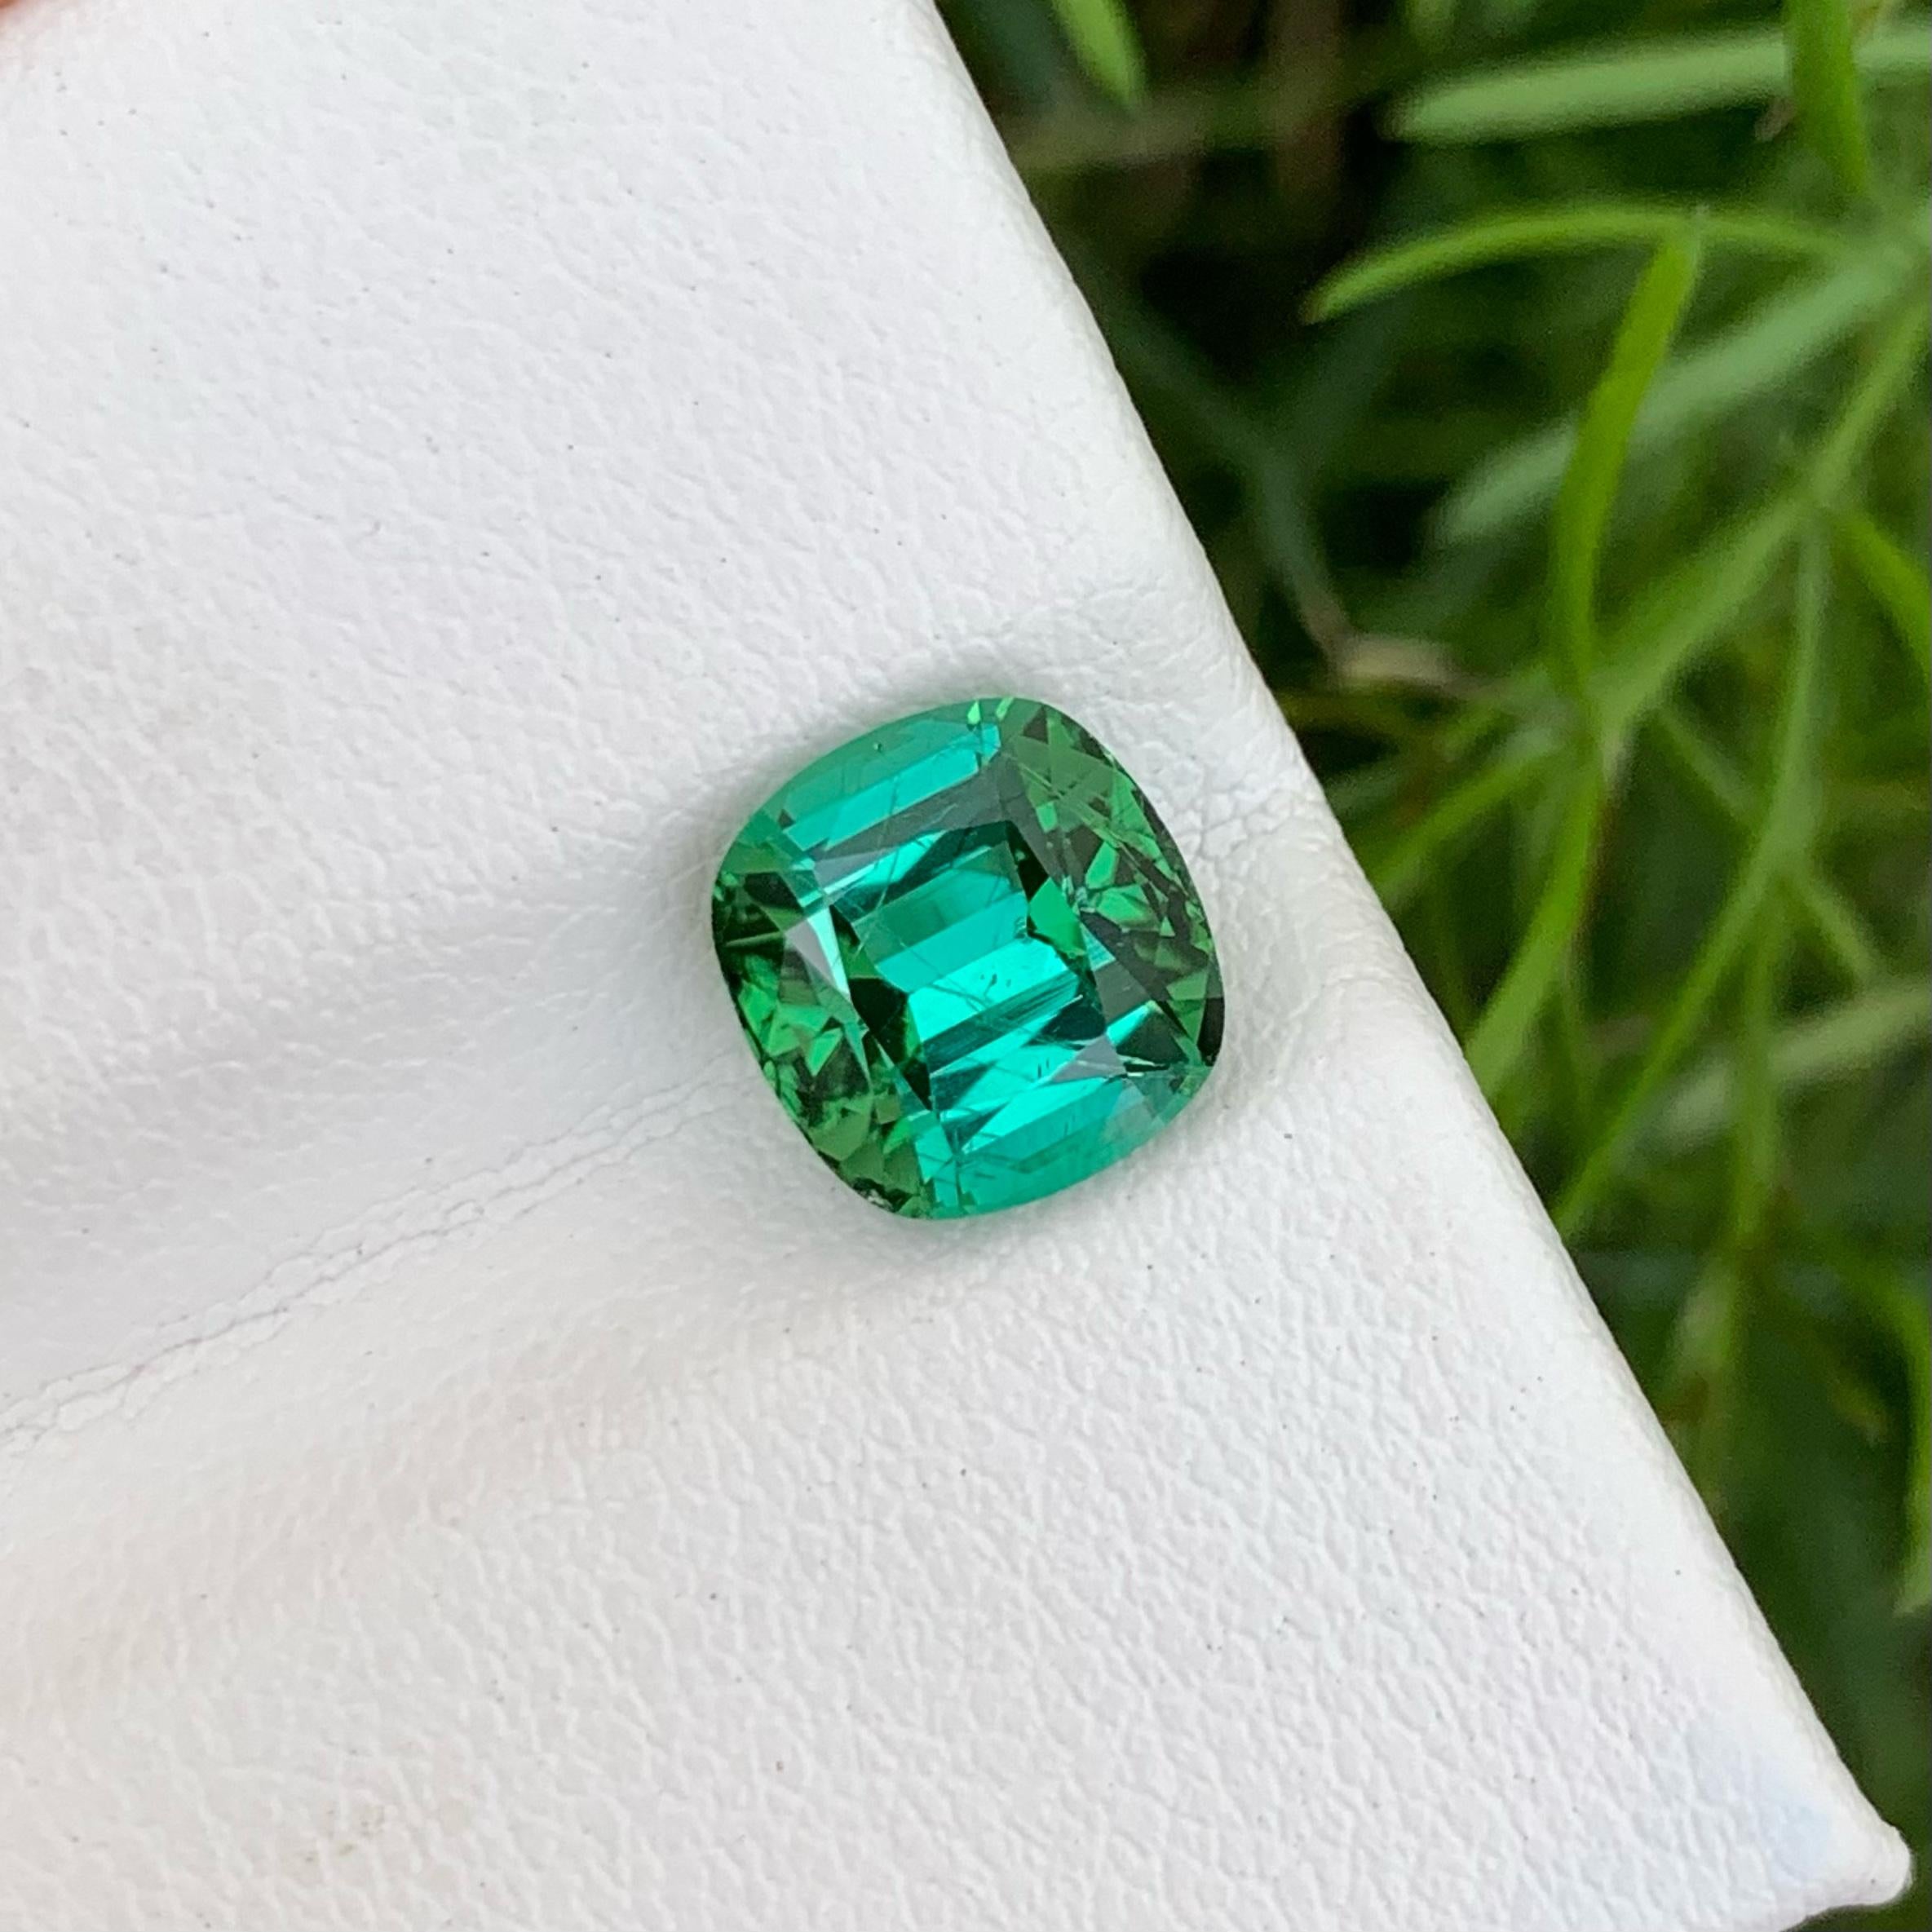 Weight: 2.55 carats 
Dimensions: 8.2 x 7.8 x 5.6 mm
Treatment: none 
Origin Afghanistan 
Clarity SI 
Shape Cushion 
Cut Fancy Cushion 

Perfect for any occasion, the Greenish Blue Tourmaline gemstone adds a touch of elegance and uniqueness to any